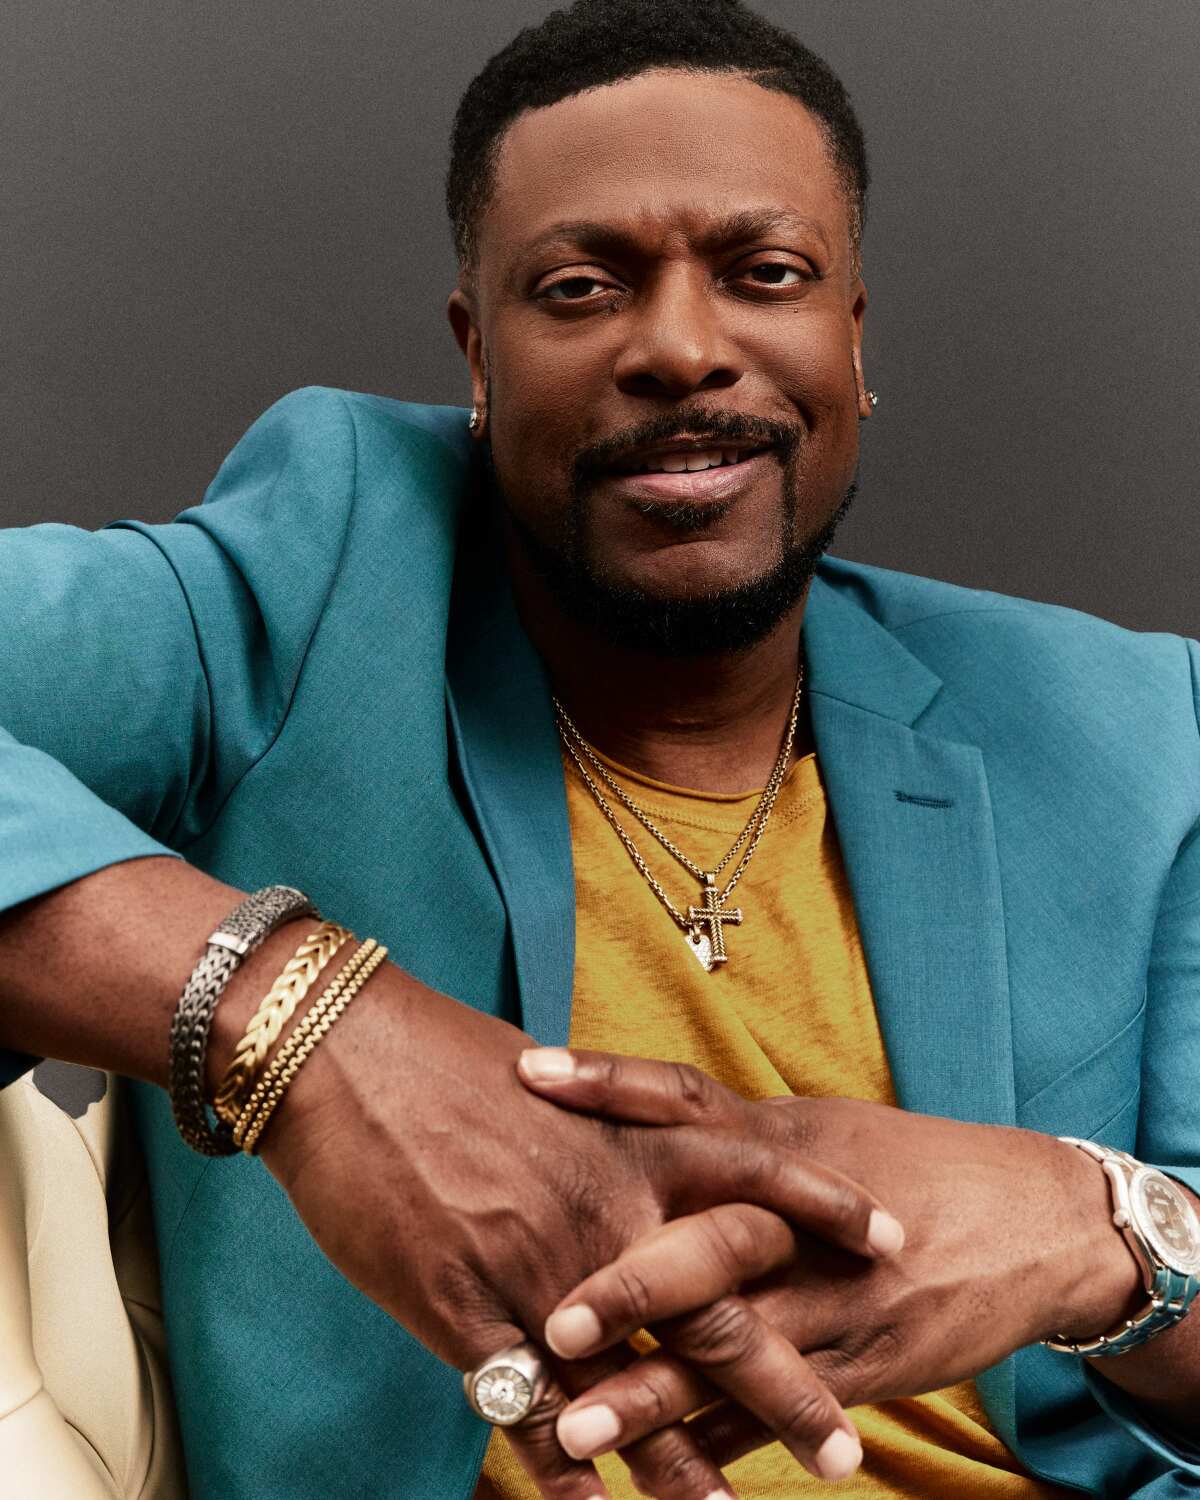 Chris Tucker smiles while leaning his arm on a seat